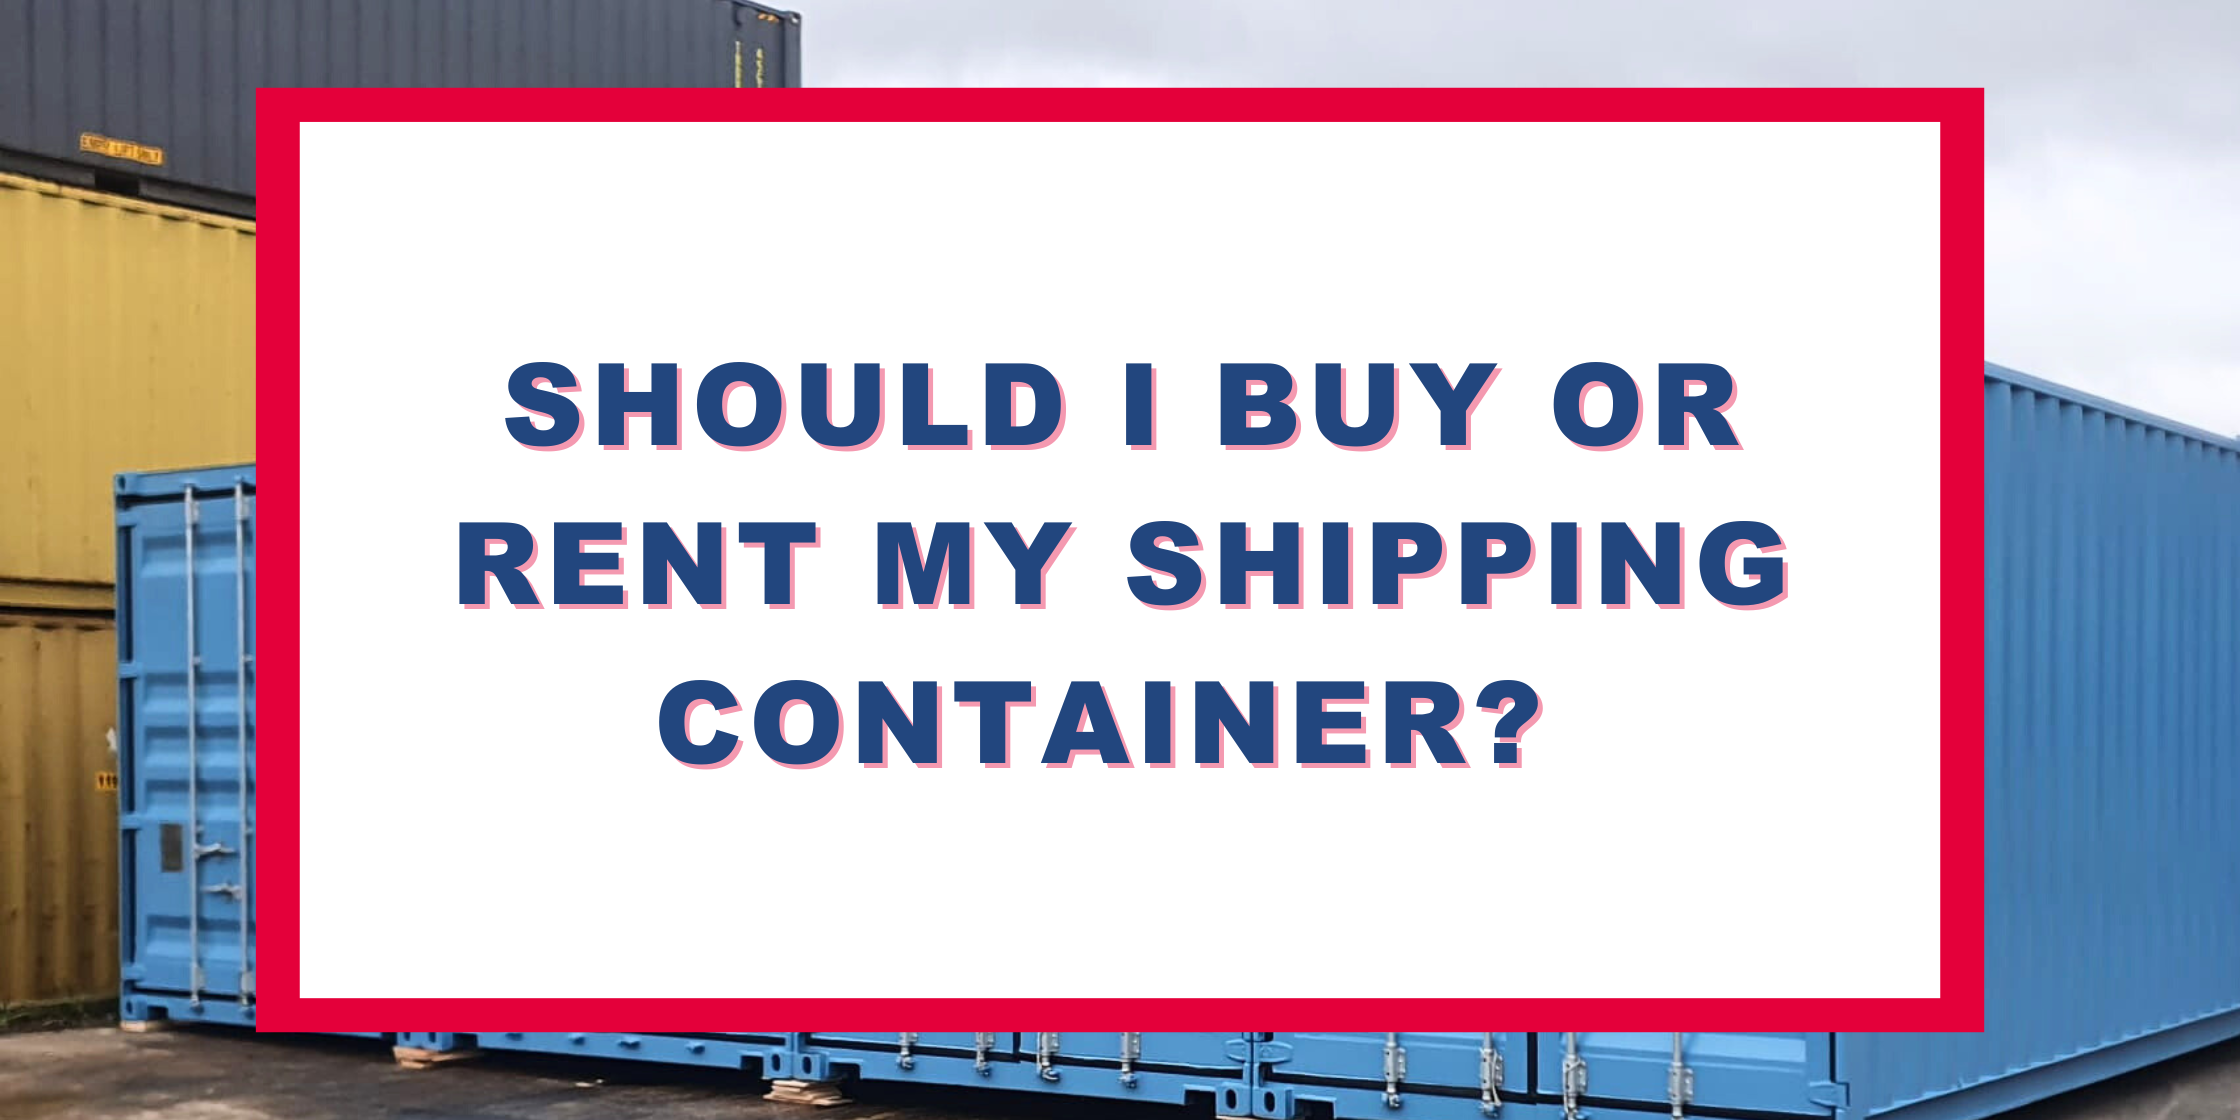 Should I Buy or Rent My Shipping Container?